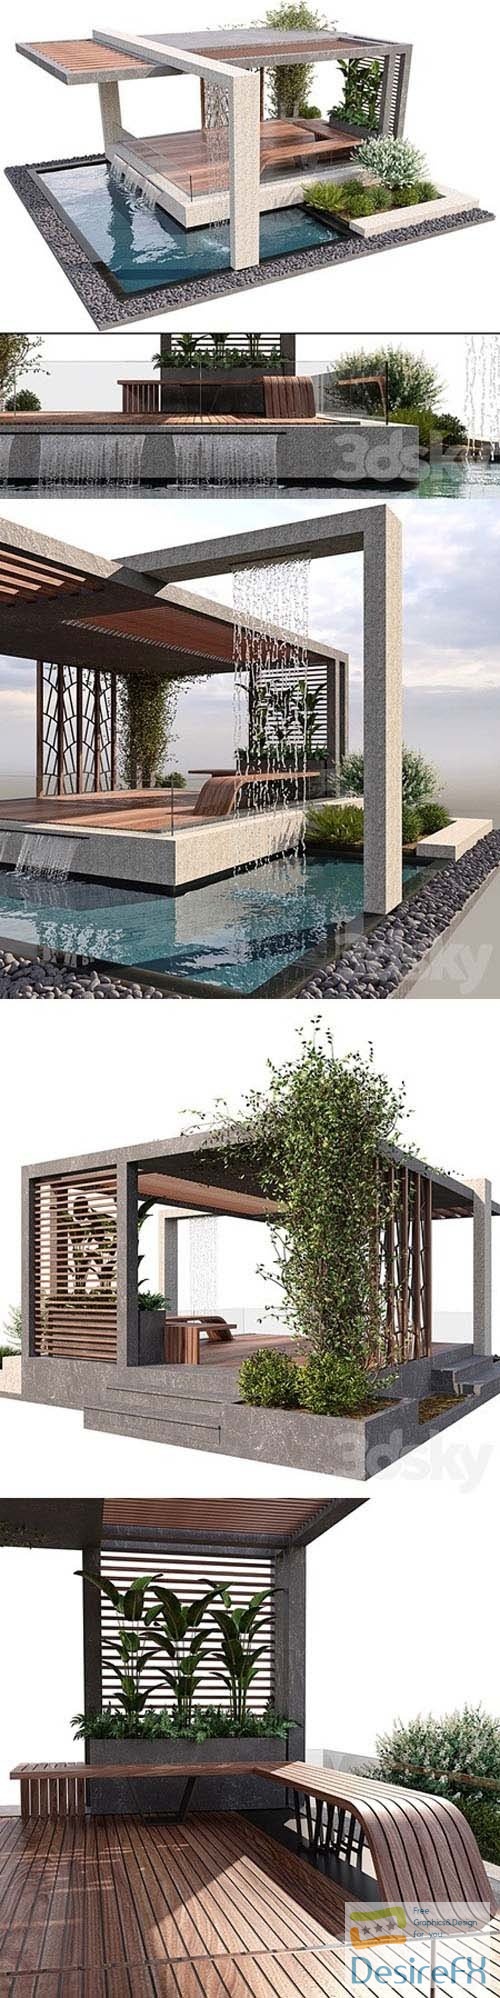 Pergola With Water & Plants - 3d model